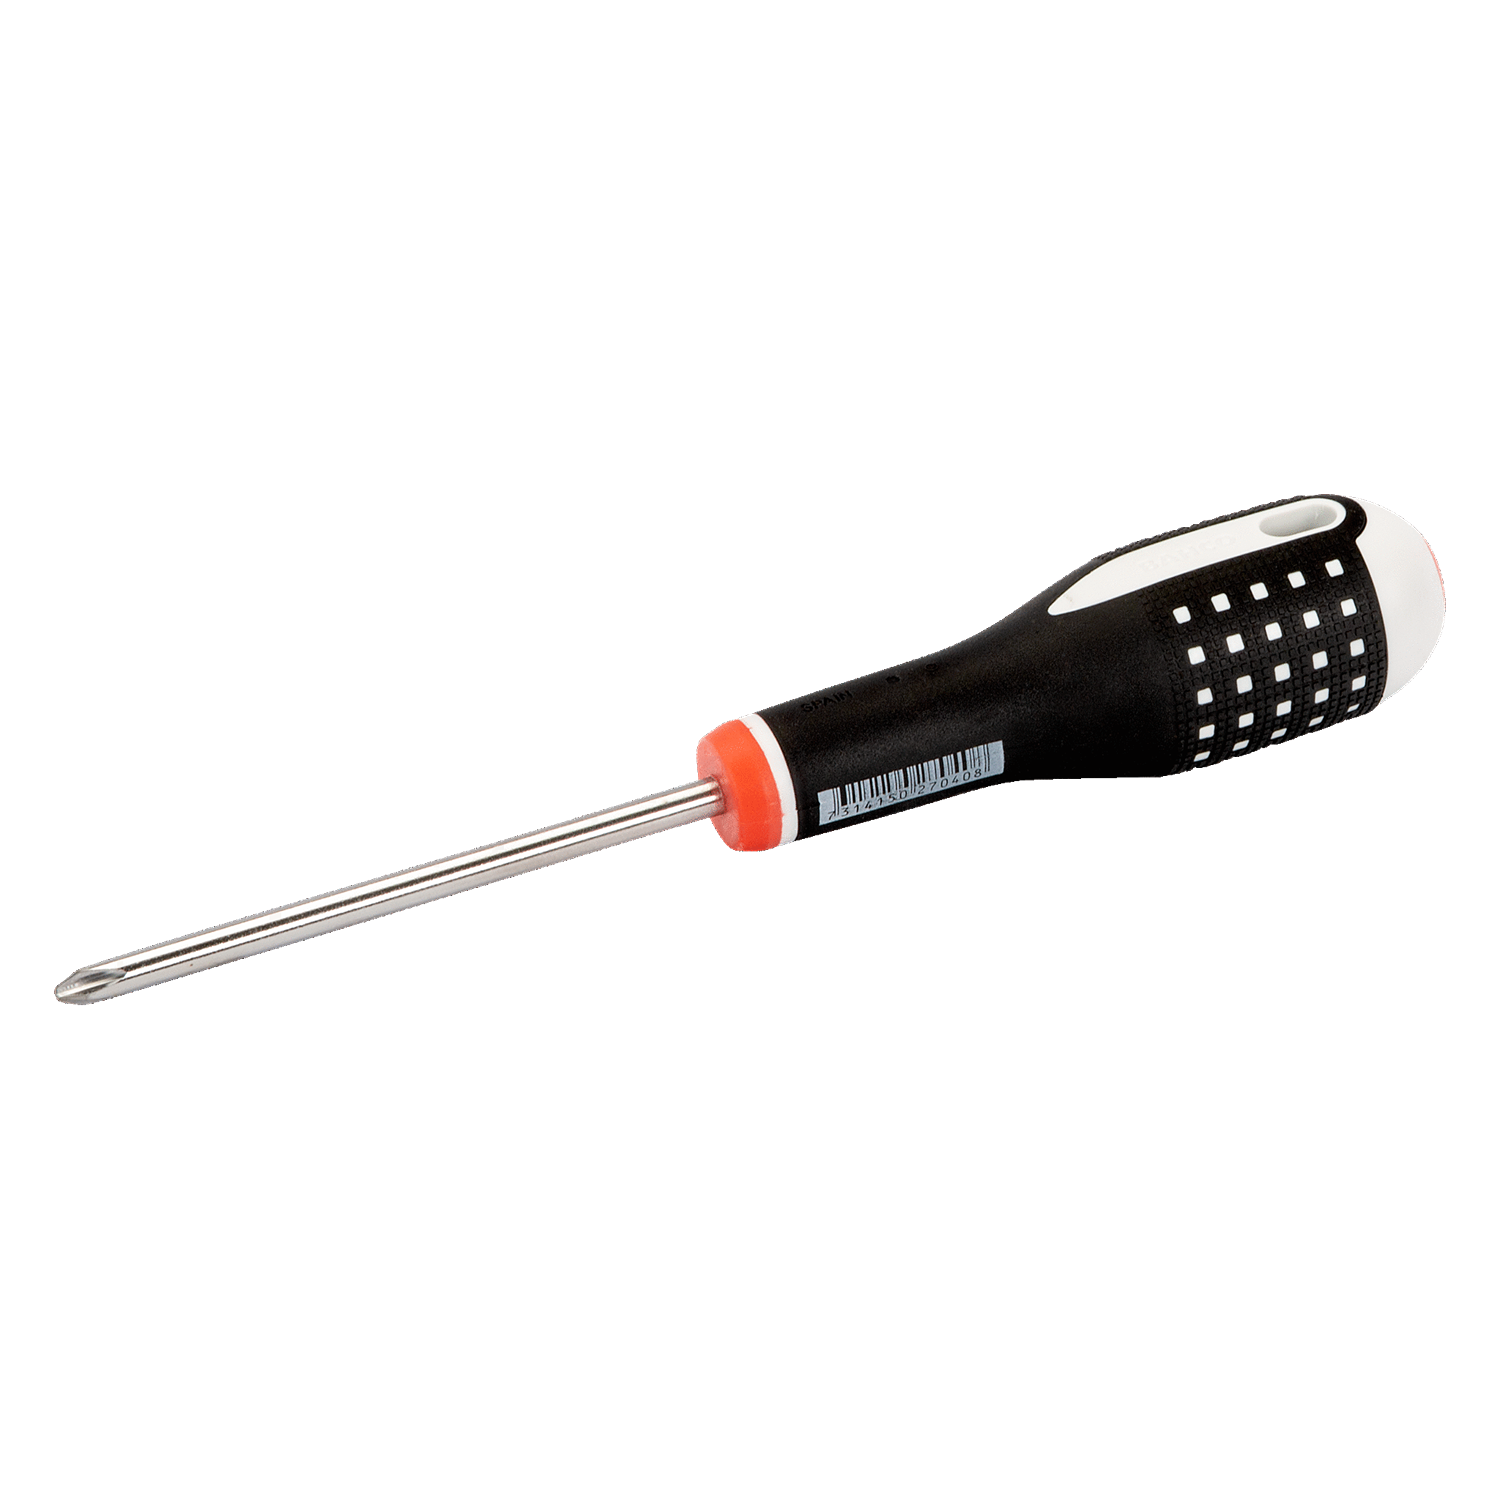 BAHCO BE-8600i-BE-8623i Phillips Screwdriver 3-Component Handle - Premium Phillips Screwdriver from BAHCO - Shop now at Yew Aik.